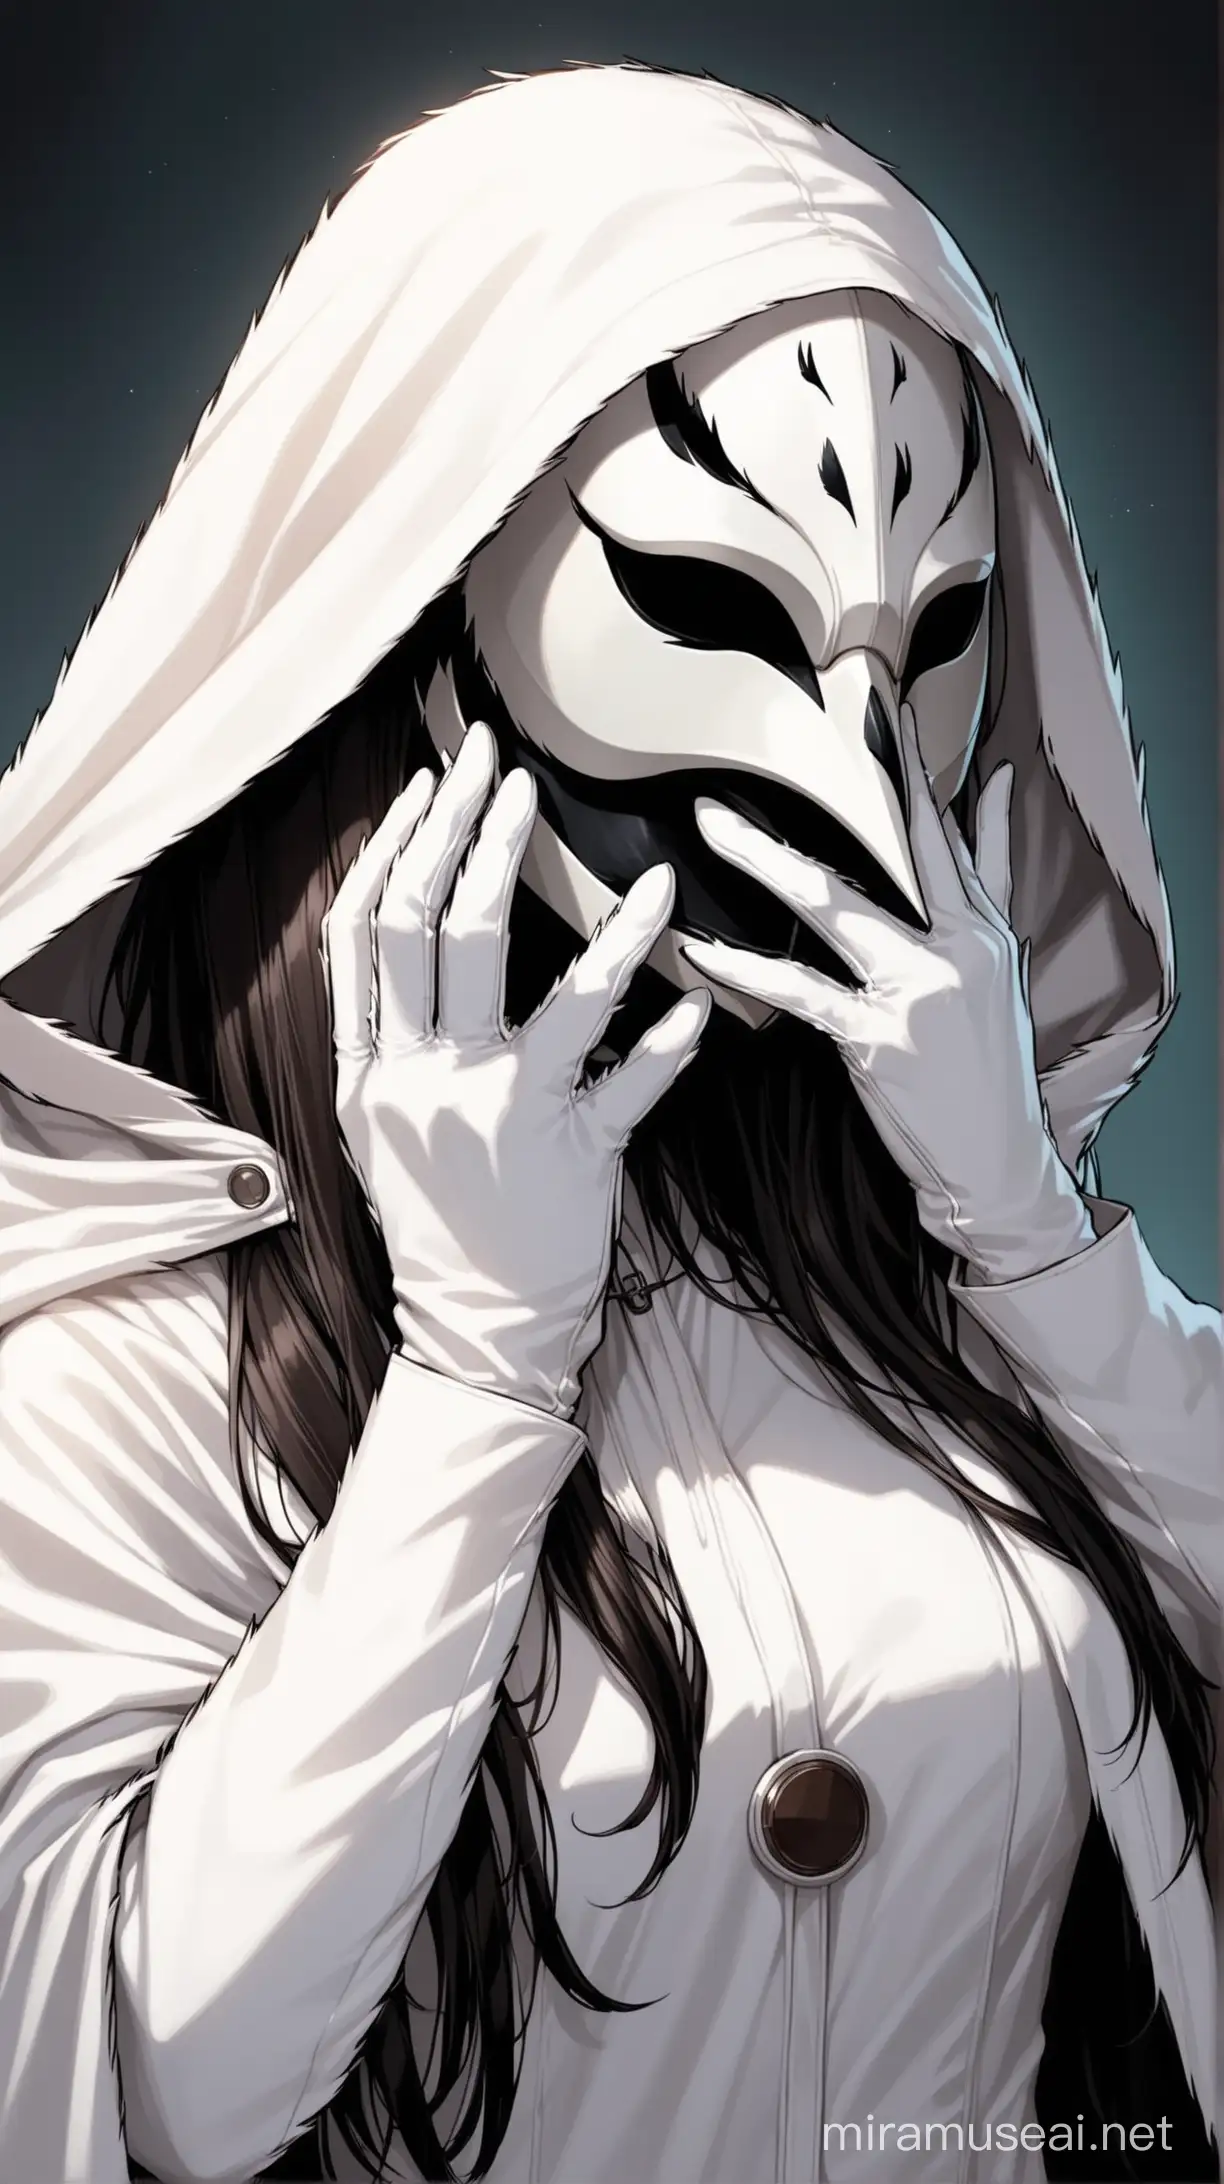 A female plauge doctor with white leather crow mask. She has an all white leather cloak that covers her head. She has her white gloved hands holding the woman's face to her mask.